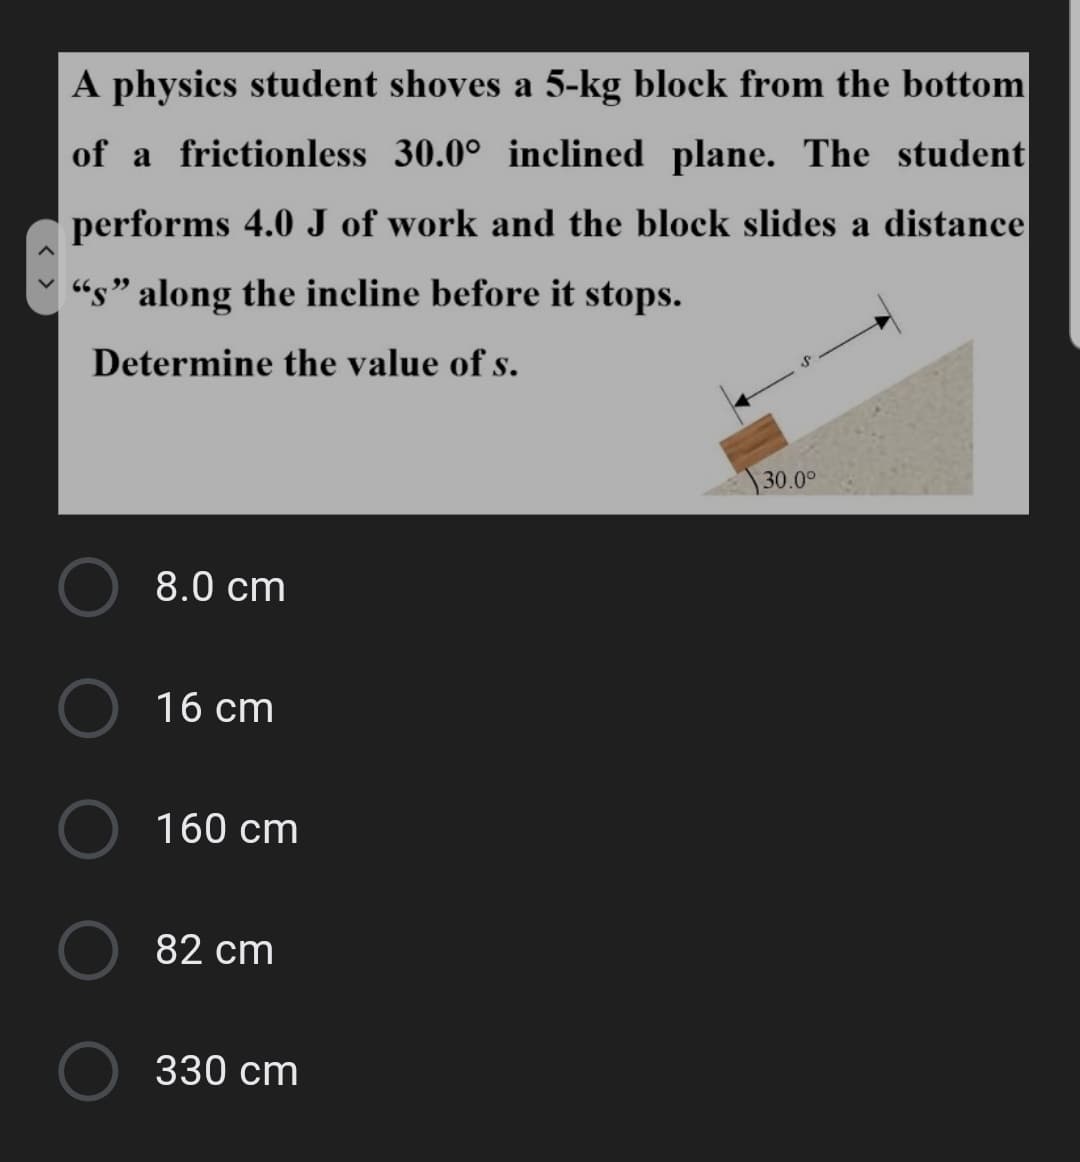 A physics student shoves a 5-kg block from the bottom
of a frictionless 30.0° inclined plane. The student
performs 4.0 J of work and the block slides a distance
“s" along the incline before it stops.
Determine the value of s.
30.00
8.0 cm
16 cm
160 cm
82 cm
330 cm
